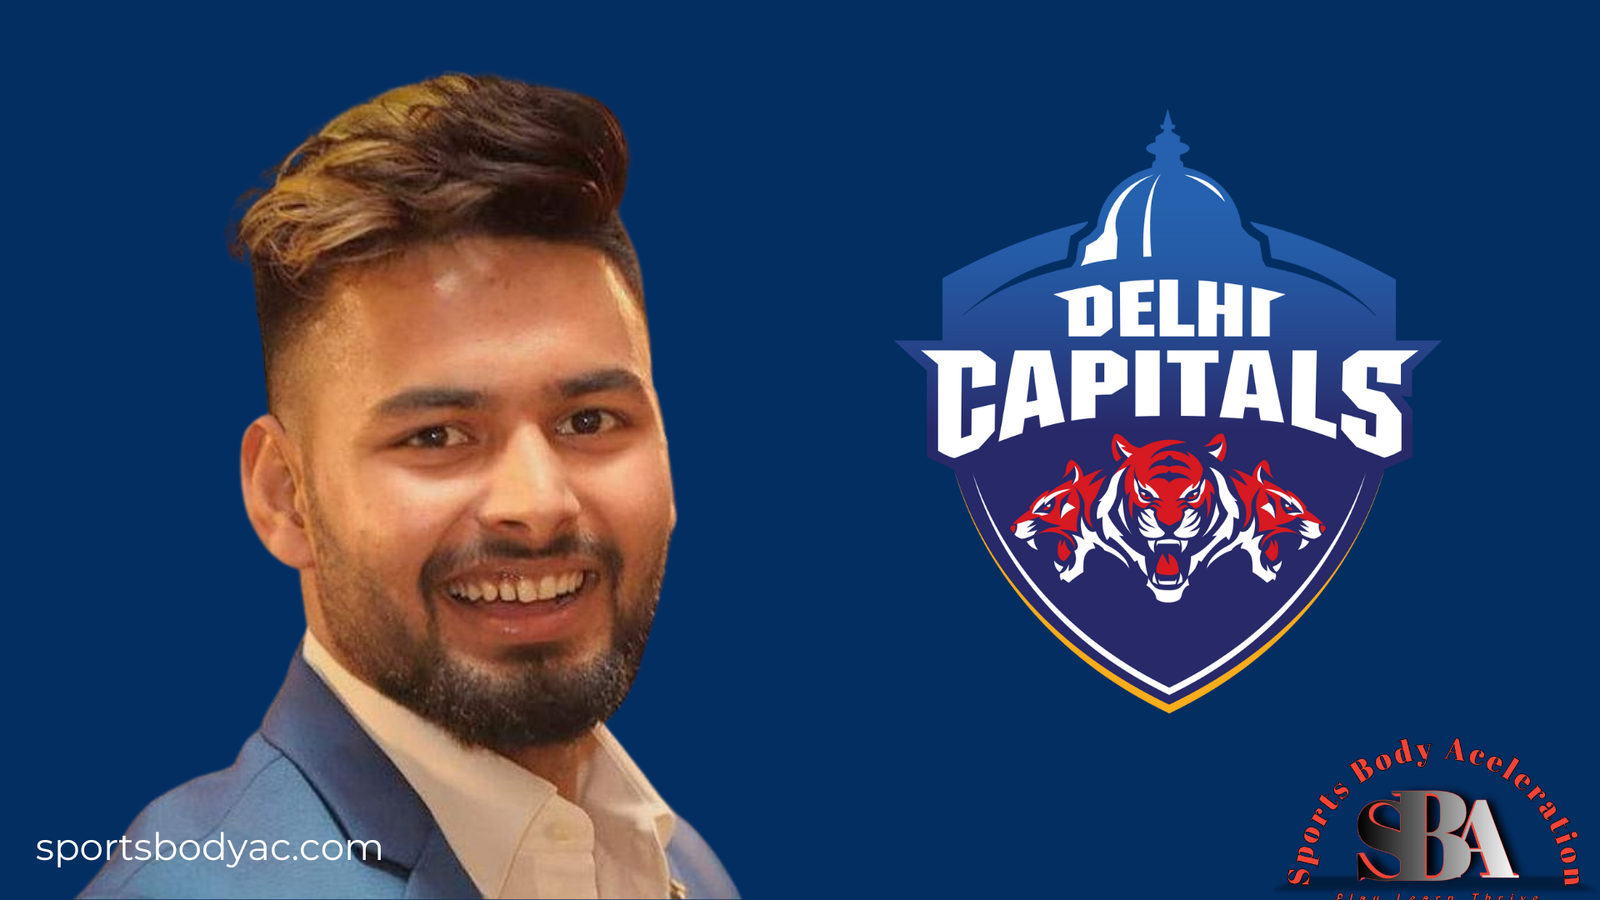 Rishabh Pant IPL Captaincy in Question: Fitness Holds the Key for Delhi Capitals